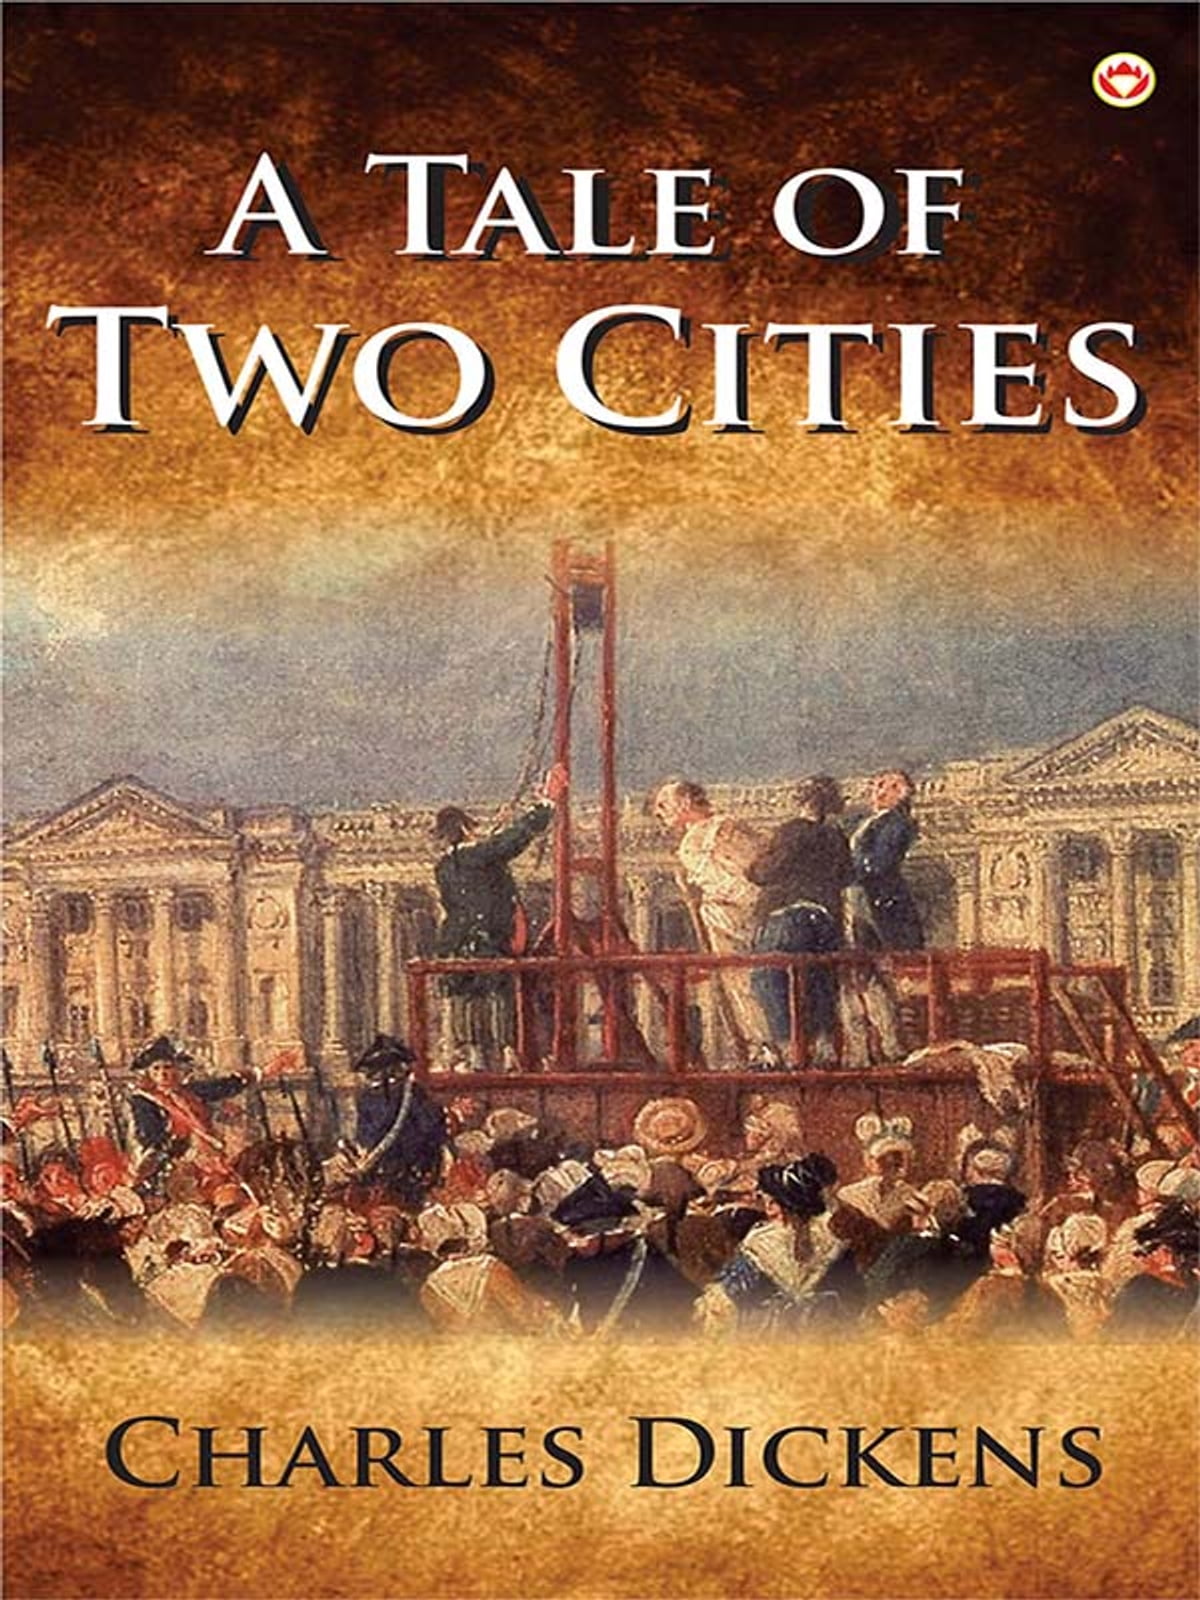 essay on a tale of two cities